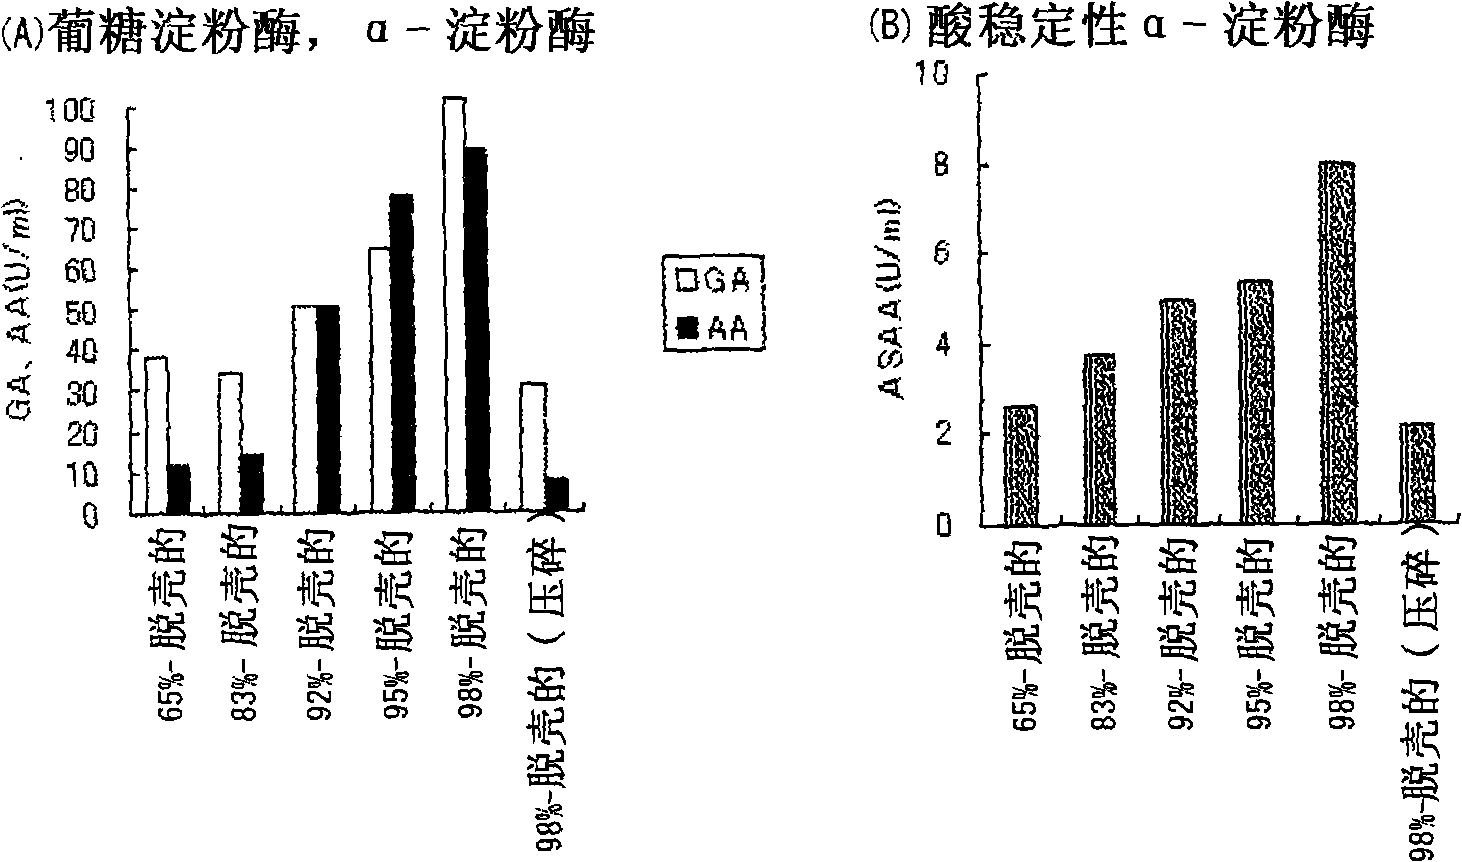 Method of producing fungal culture